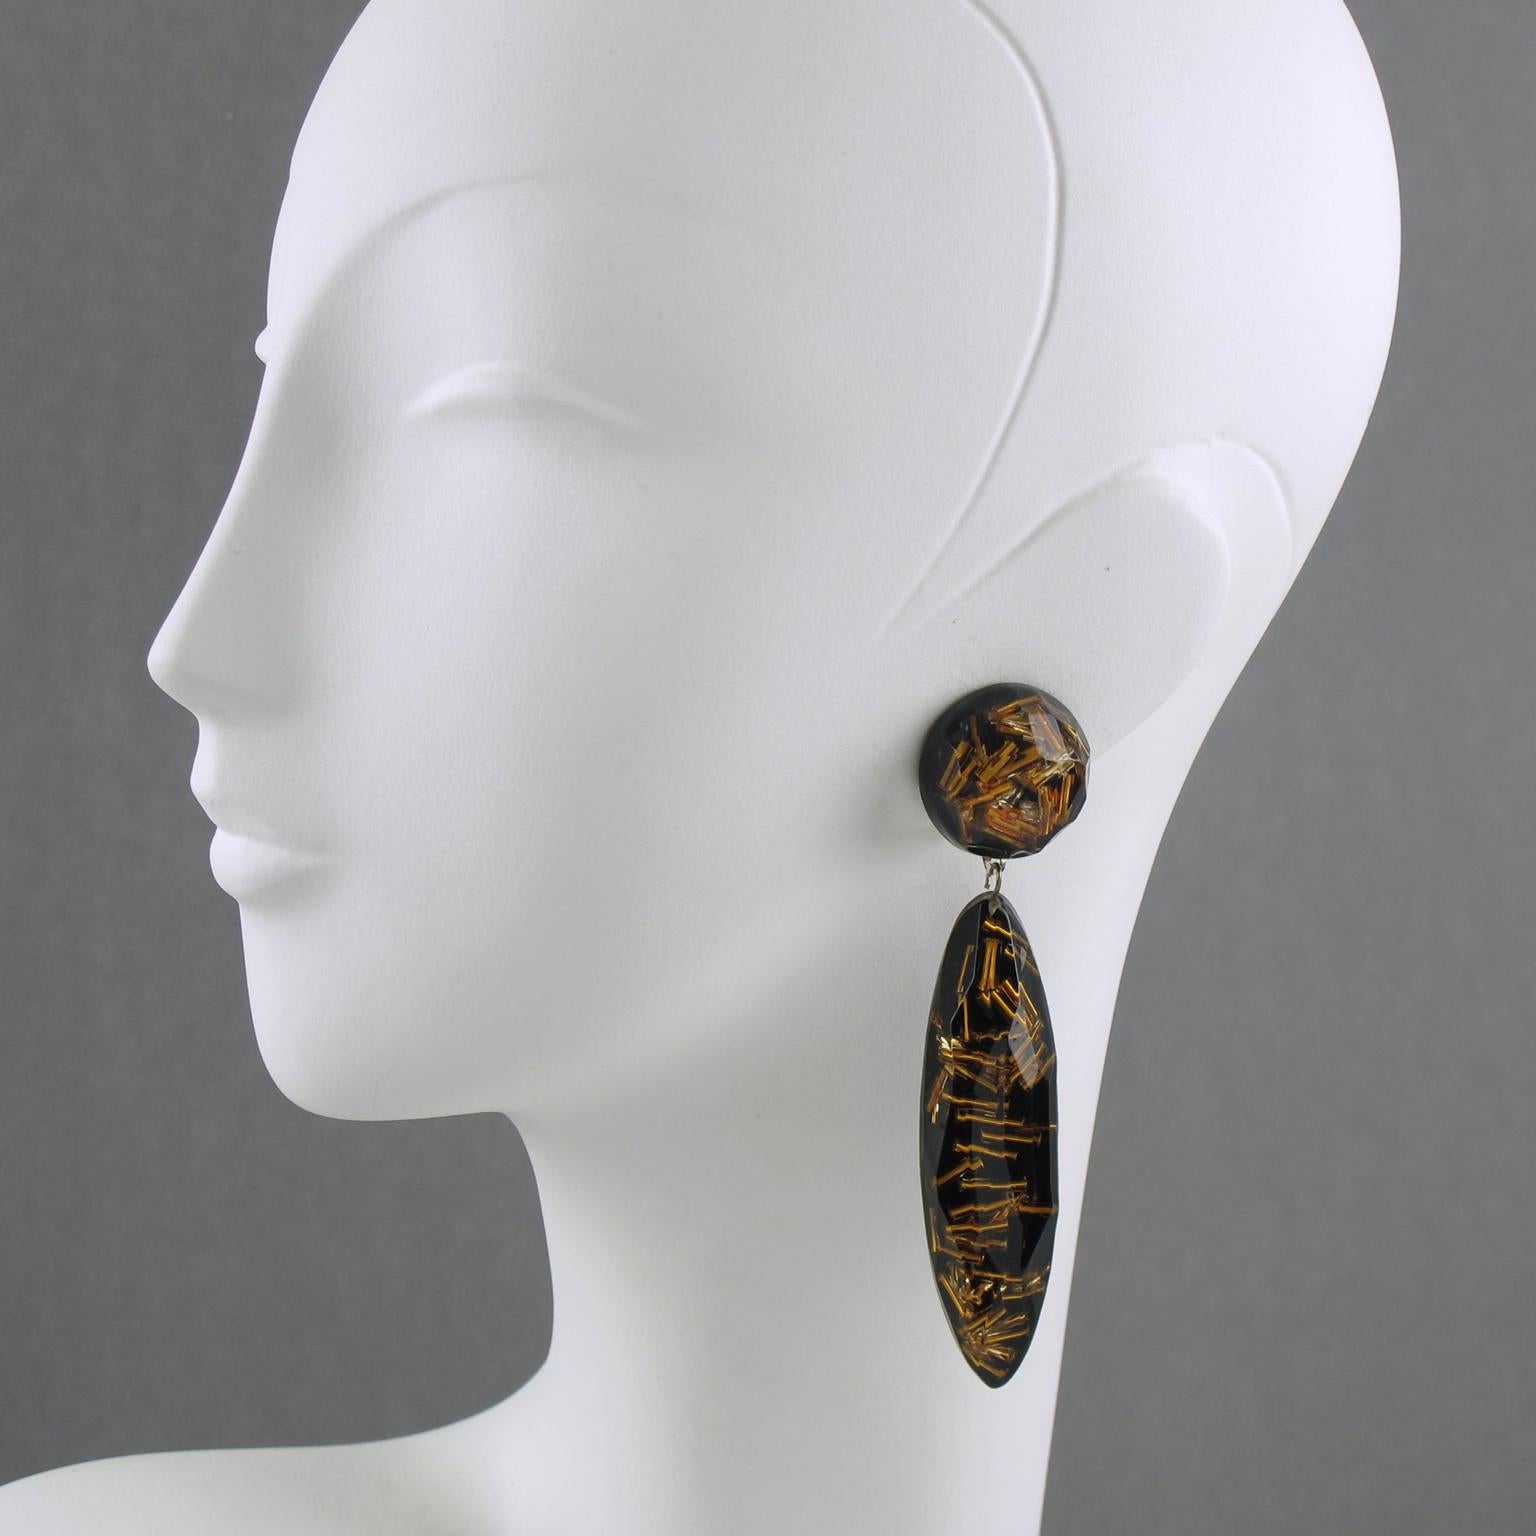 Lovely French oversized Lucite clip-on earrings. Featuring dangling shape, with an extra-long drop carved and faceted bead, compliment with gilt stick beads inclusions over black background. No visible maker's mark.
Measurements: 3.94 in. long (10